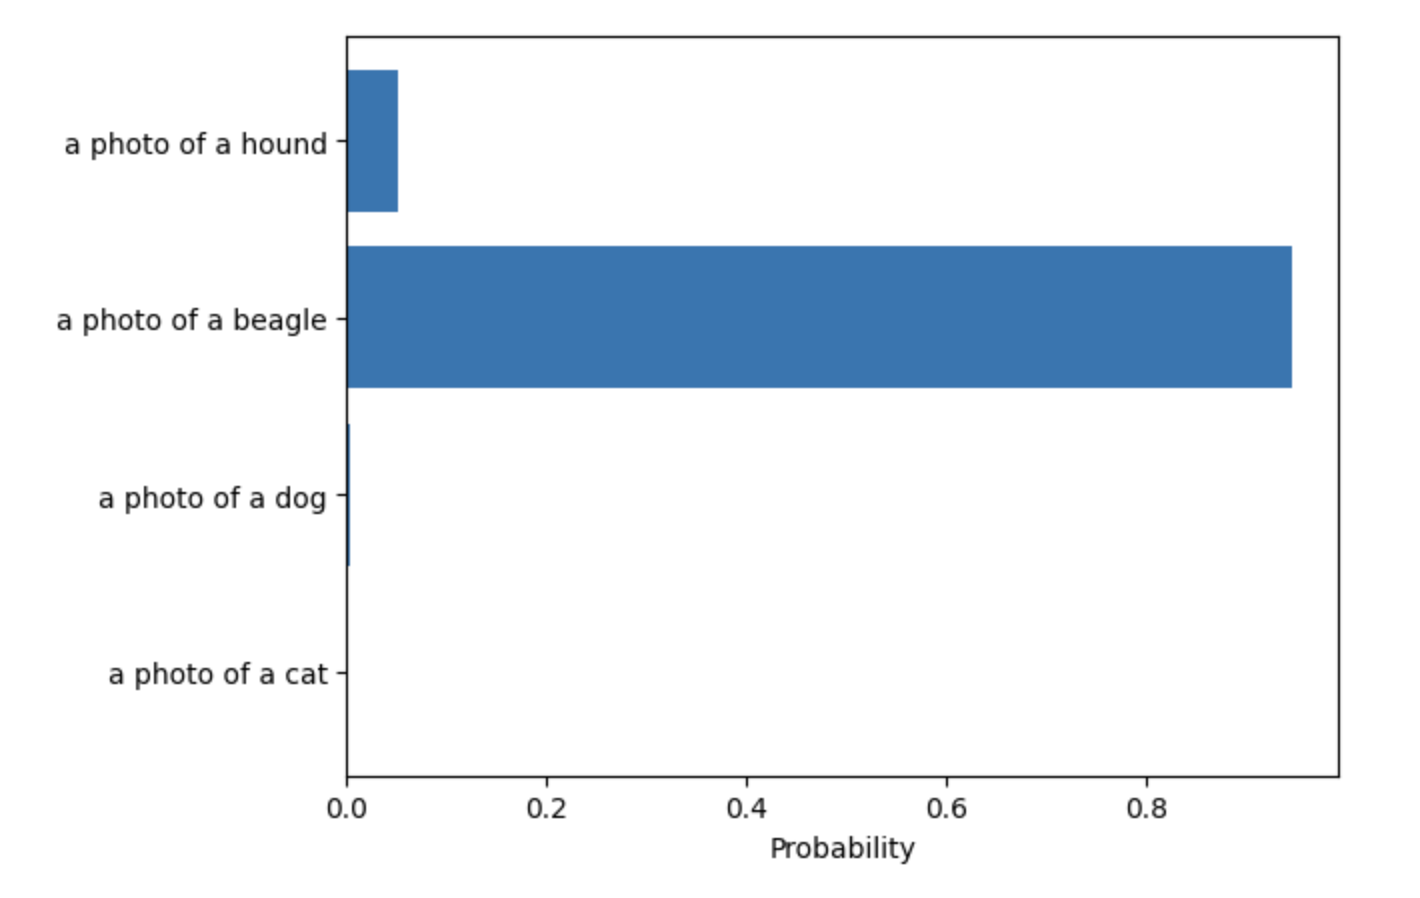 A histogram showing image classification results